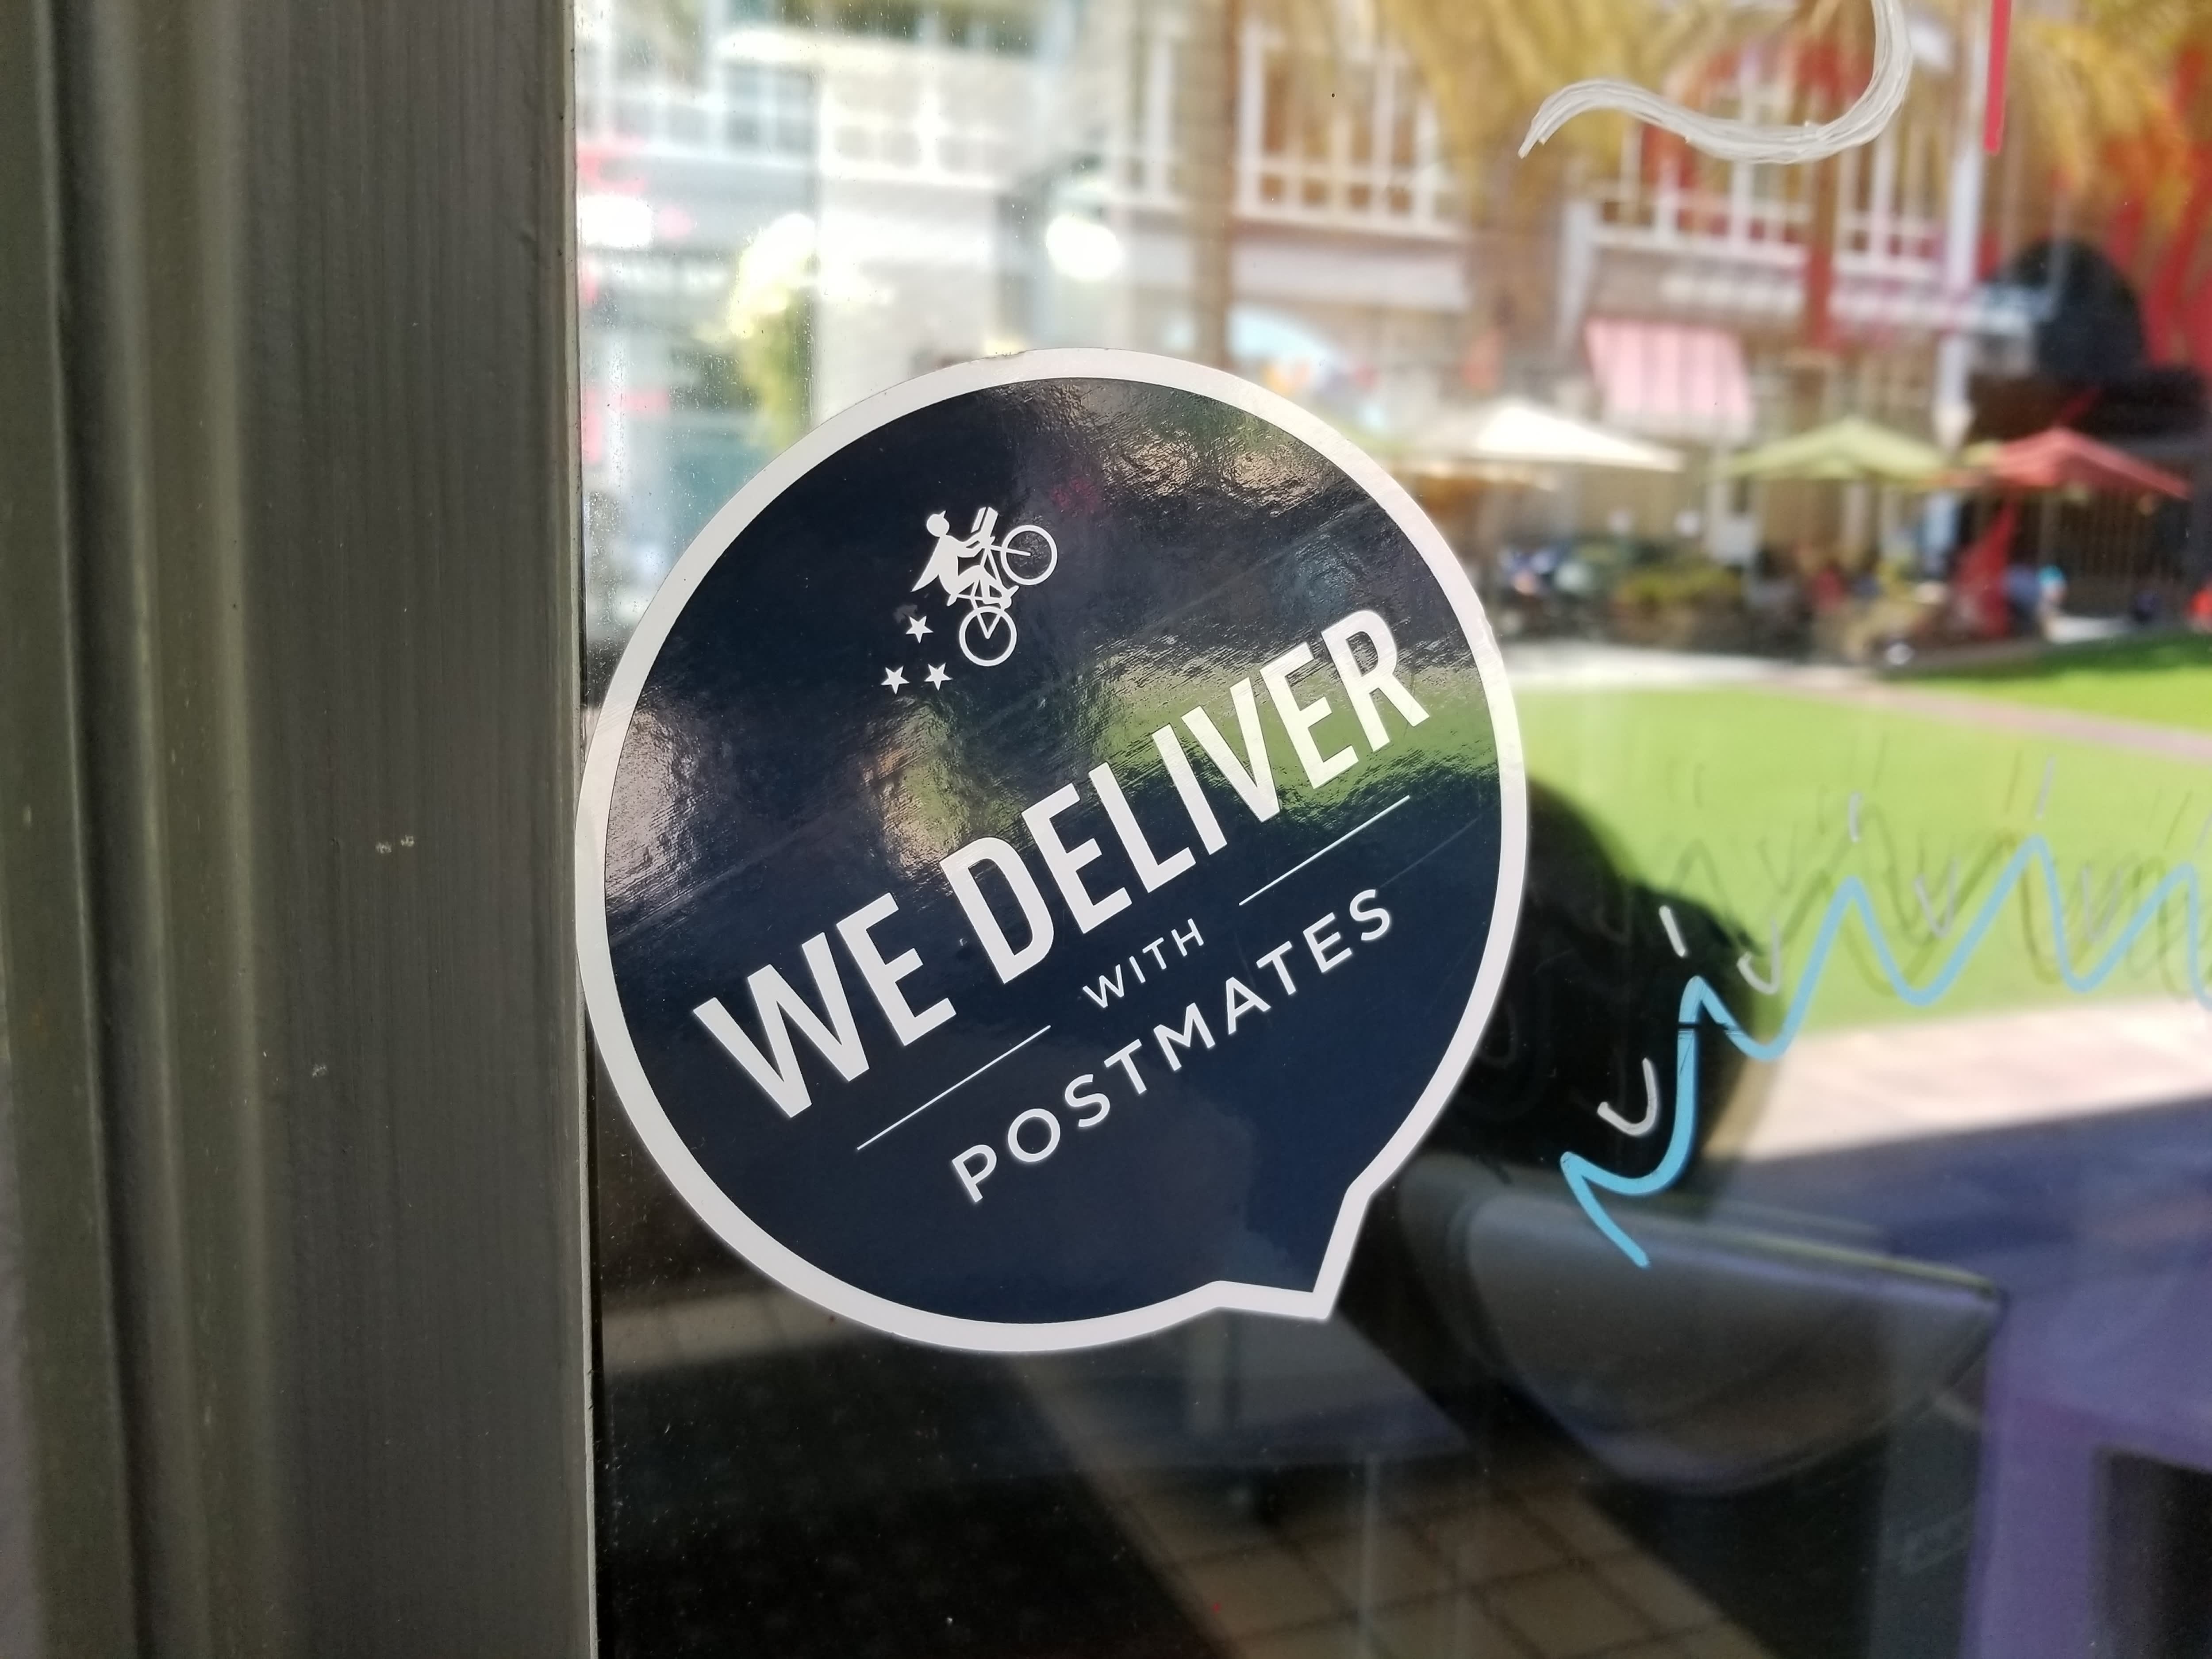 Postmates is deciding between going public and selling to Uber or special purpose acquisition company - CNBC